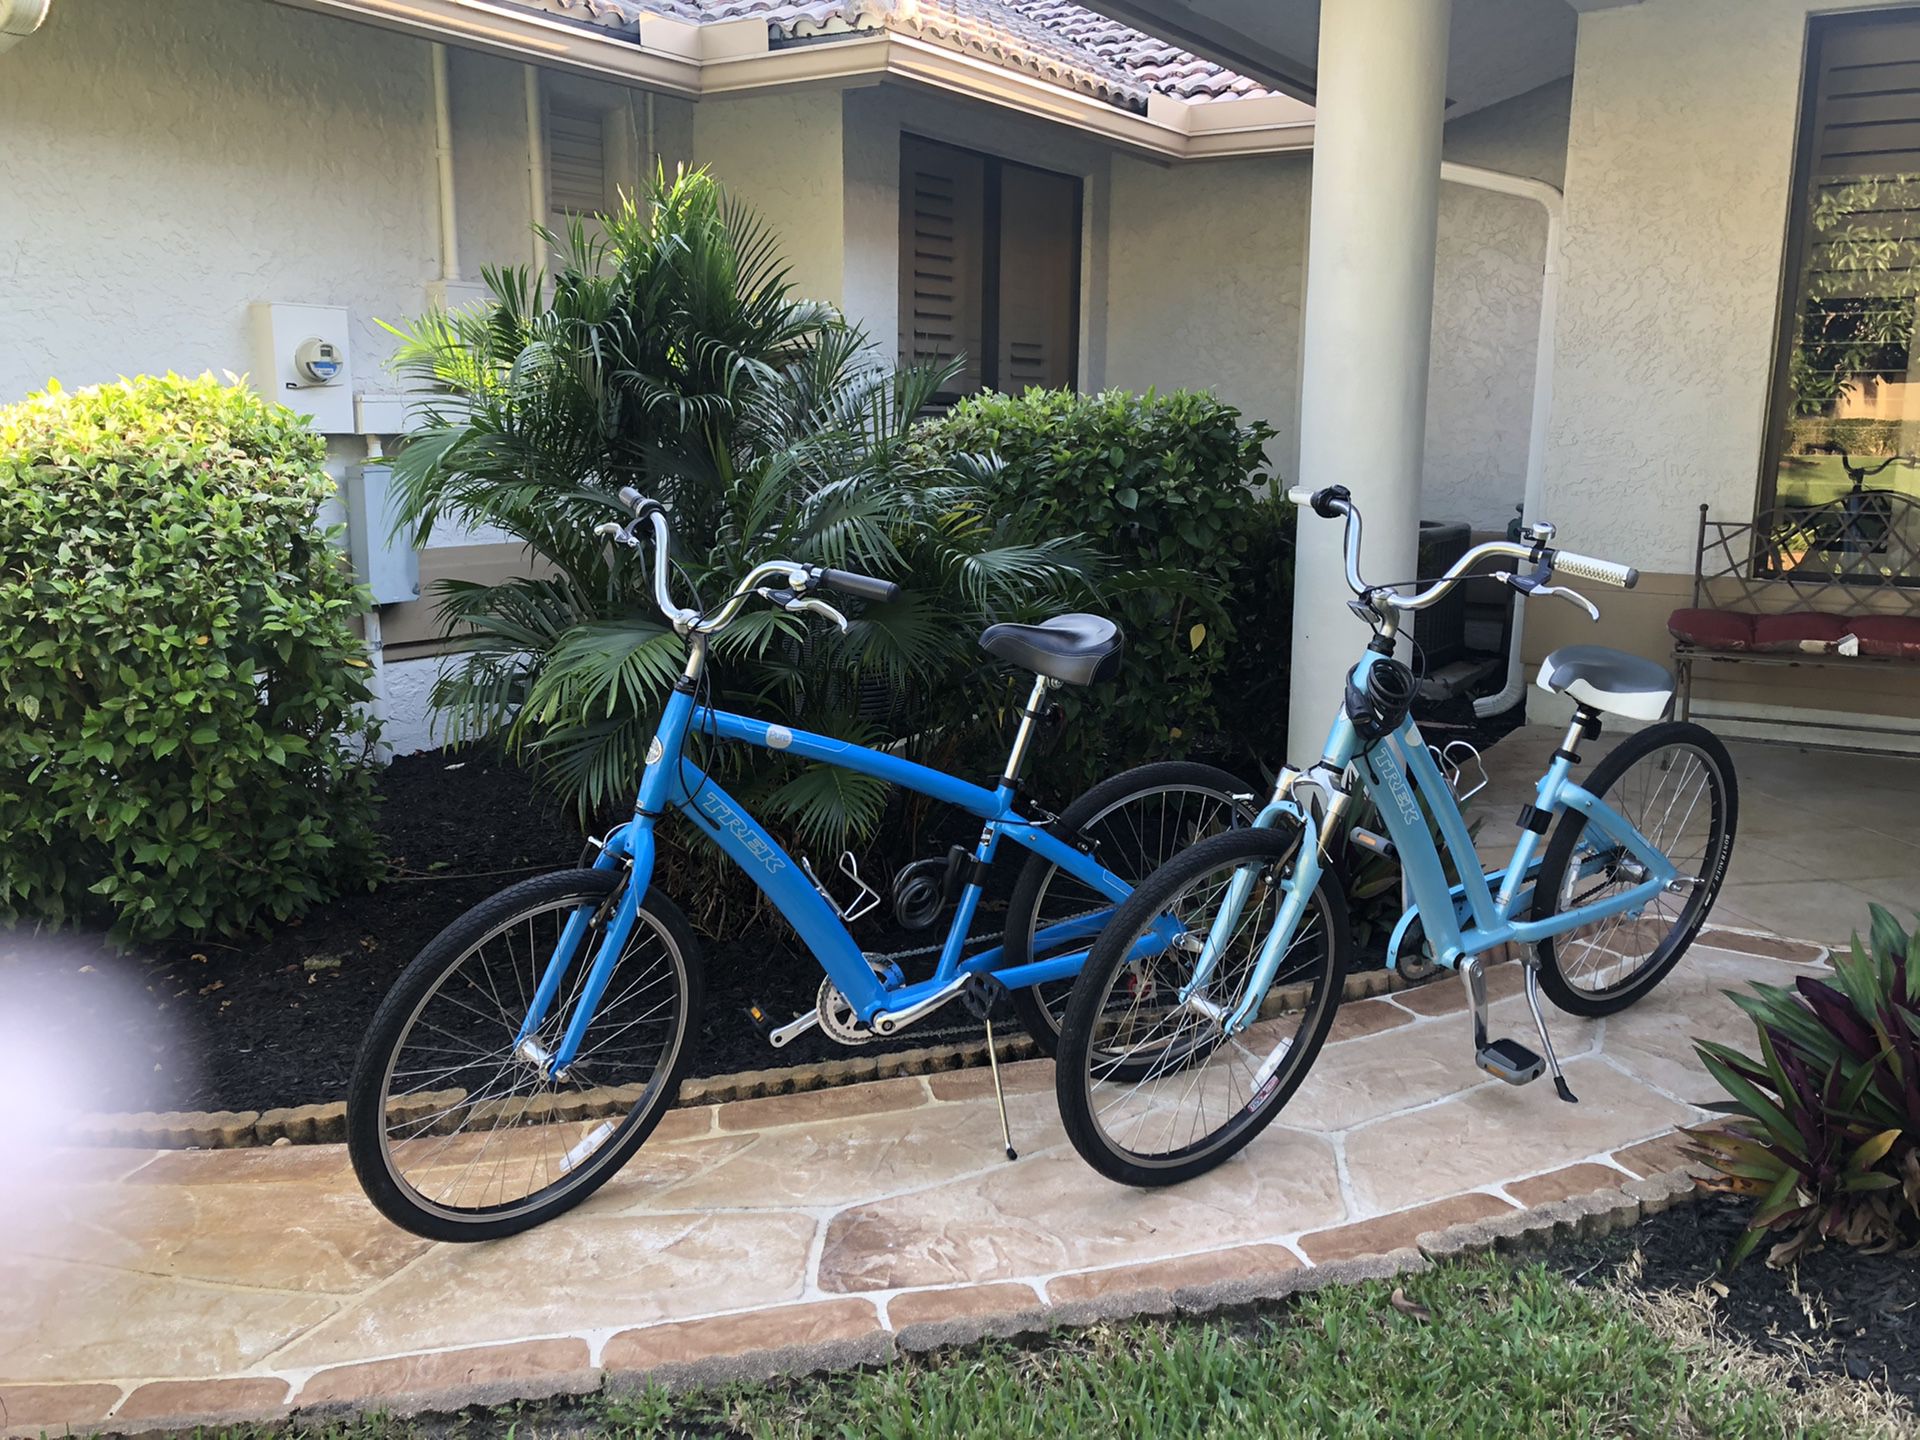 Like new, hardly ever used, TREK his and hers bicycles.